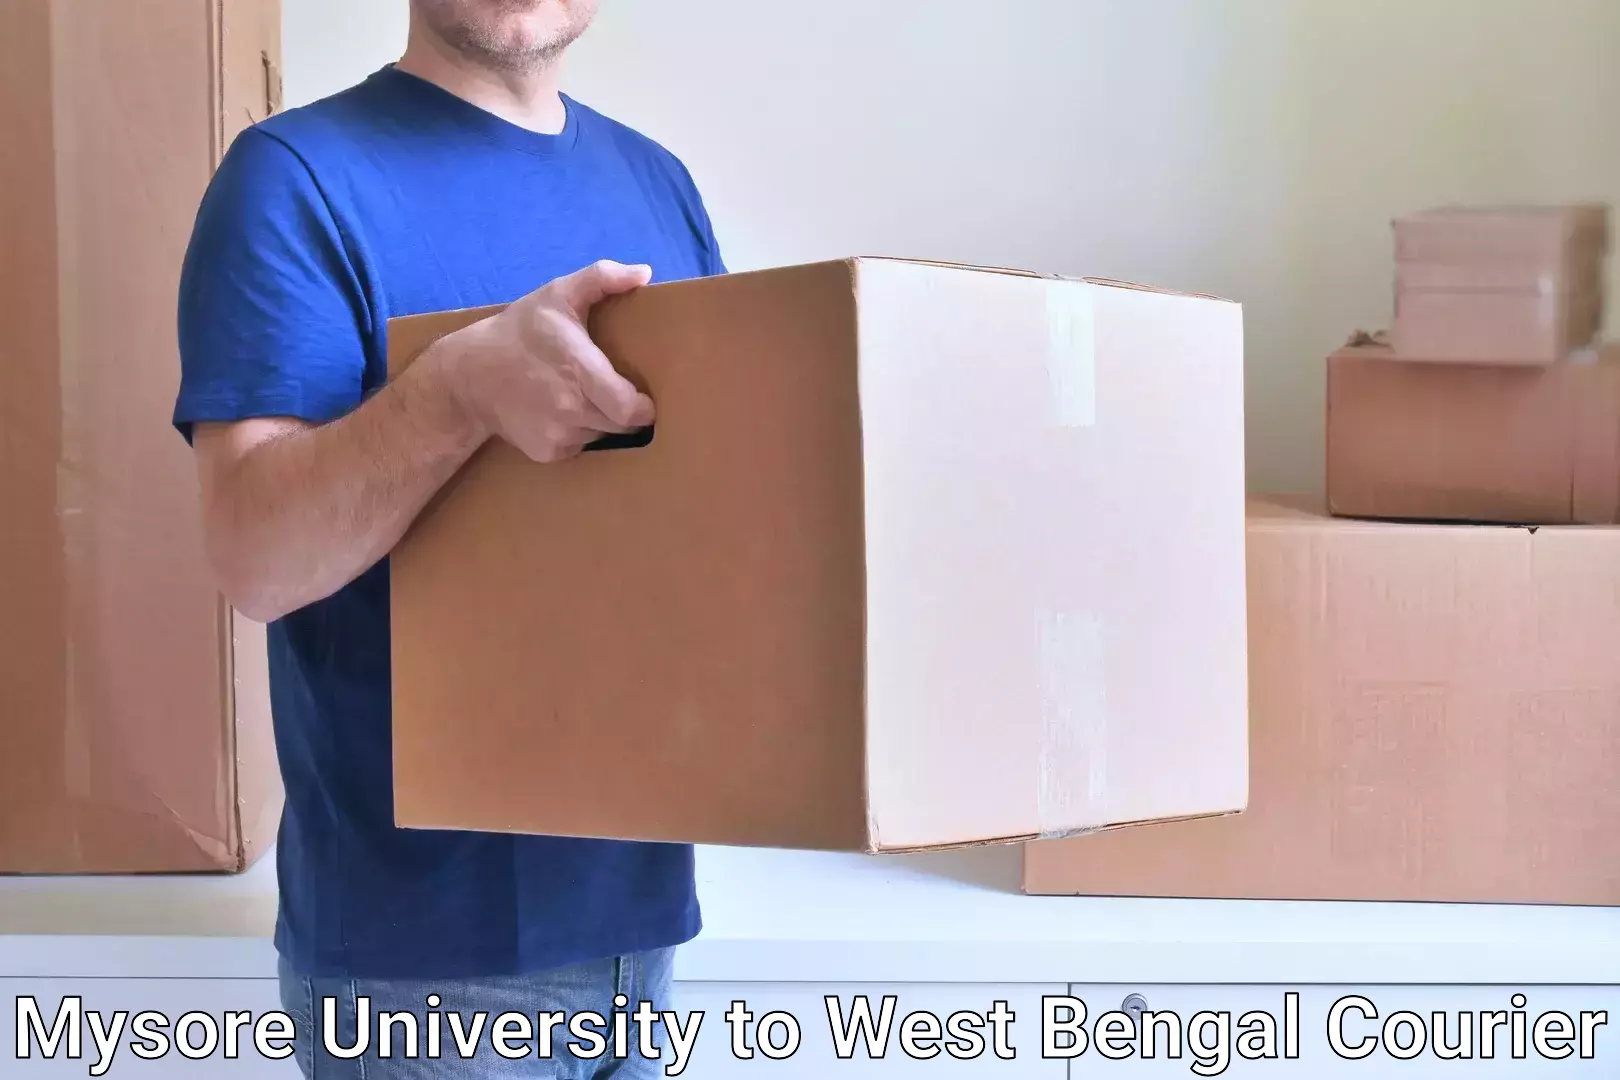 Bulk order courier in Mysore University to South 24 Parganas